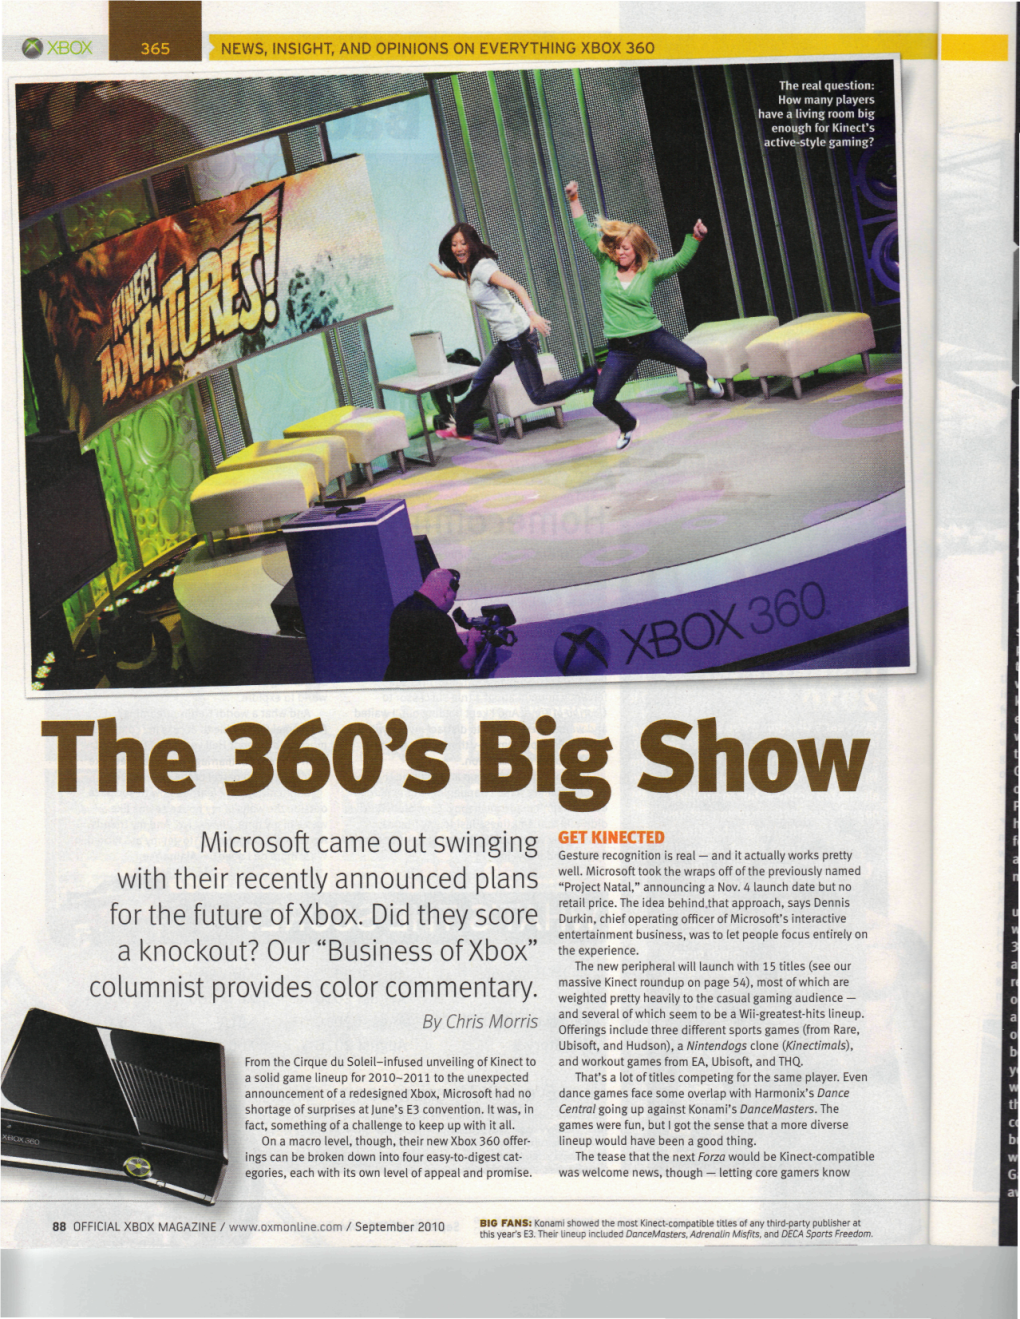 The 360'S Big Show